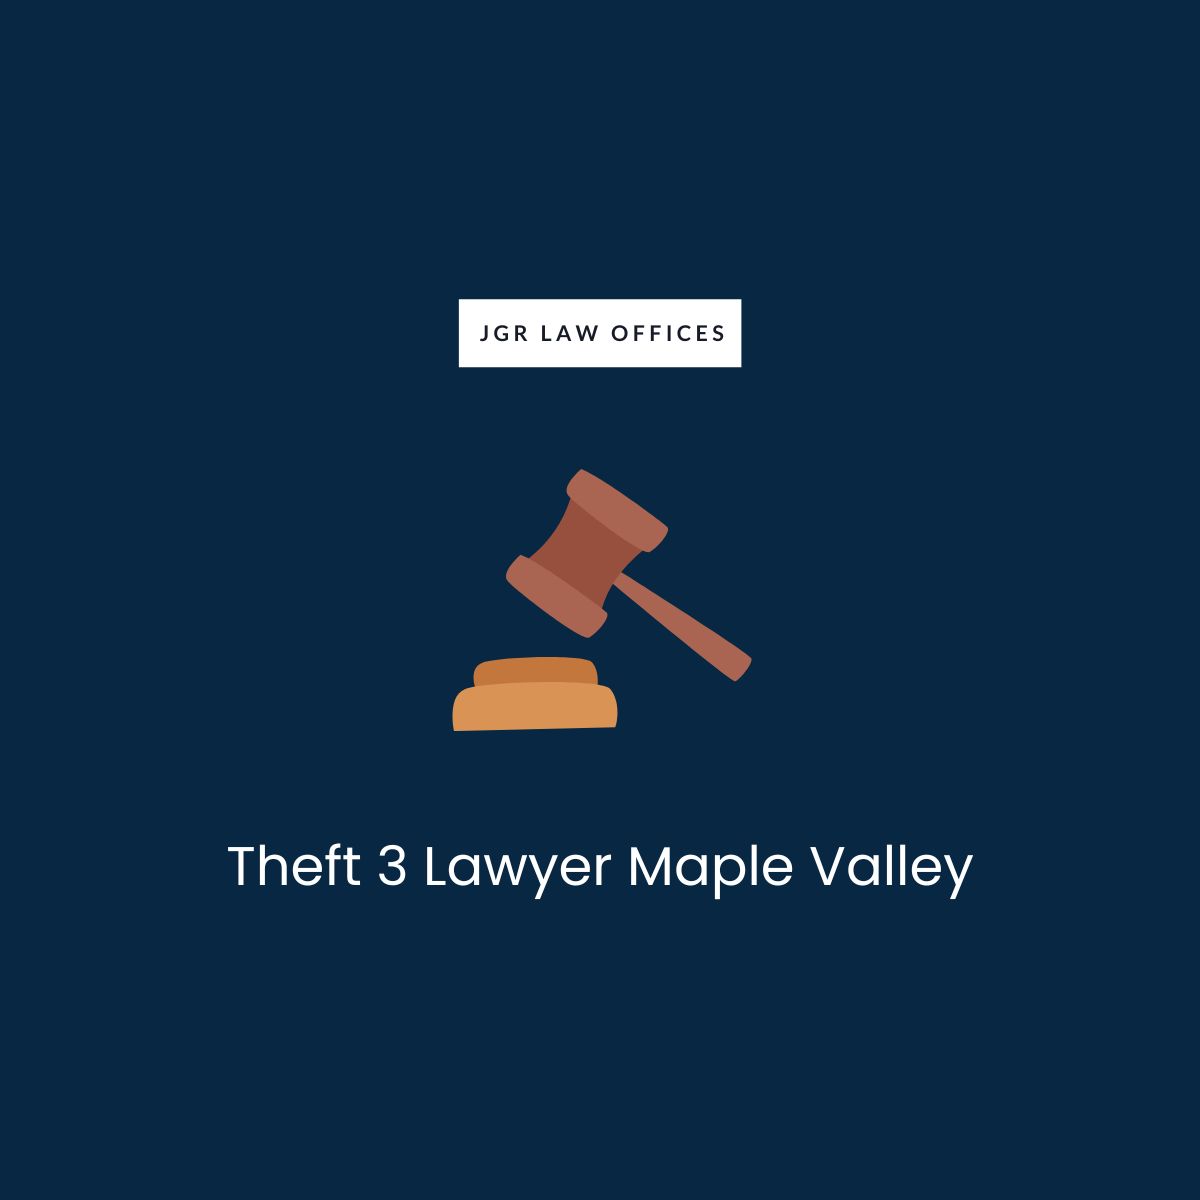 Theft 3 Lawyer Maple Valley Theft 3 Theft 3